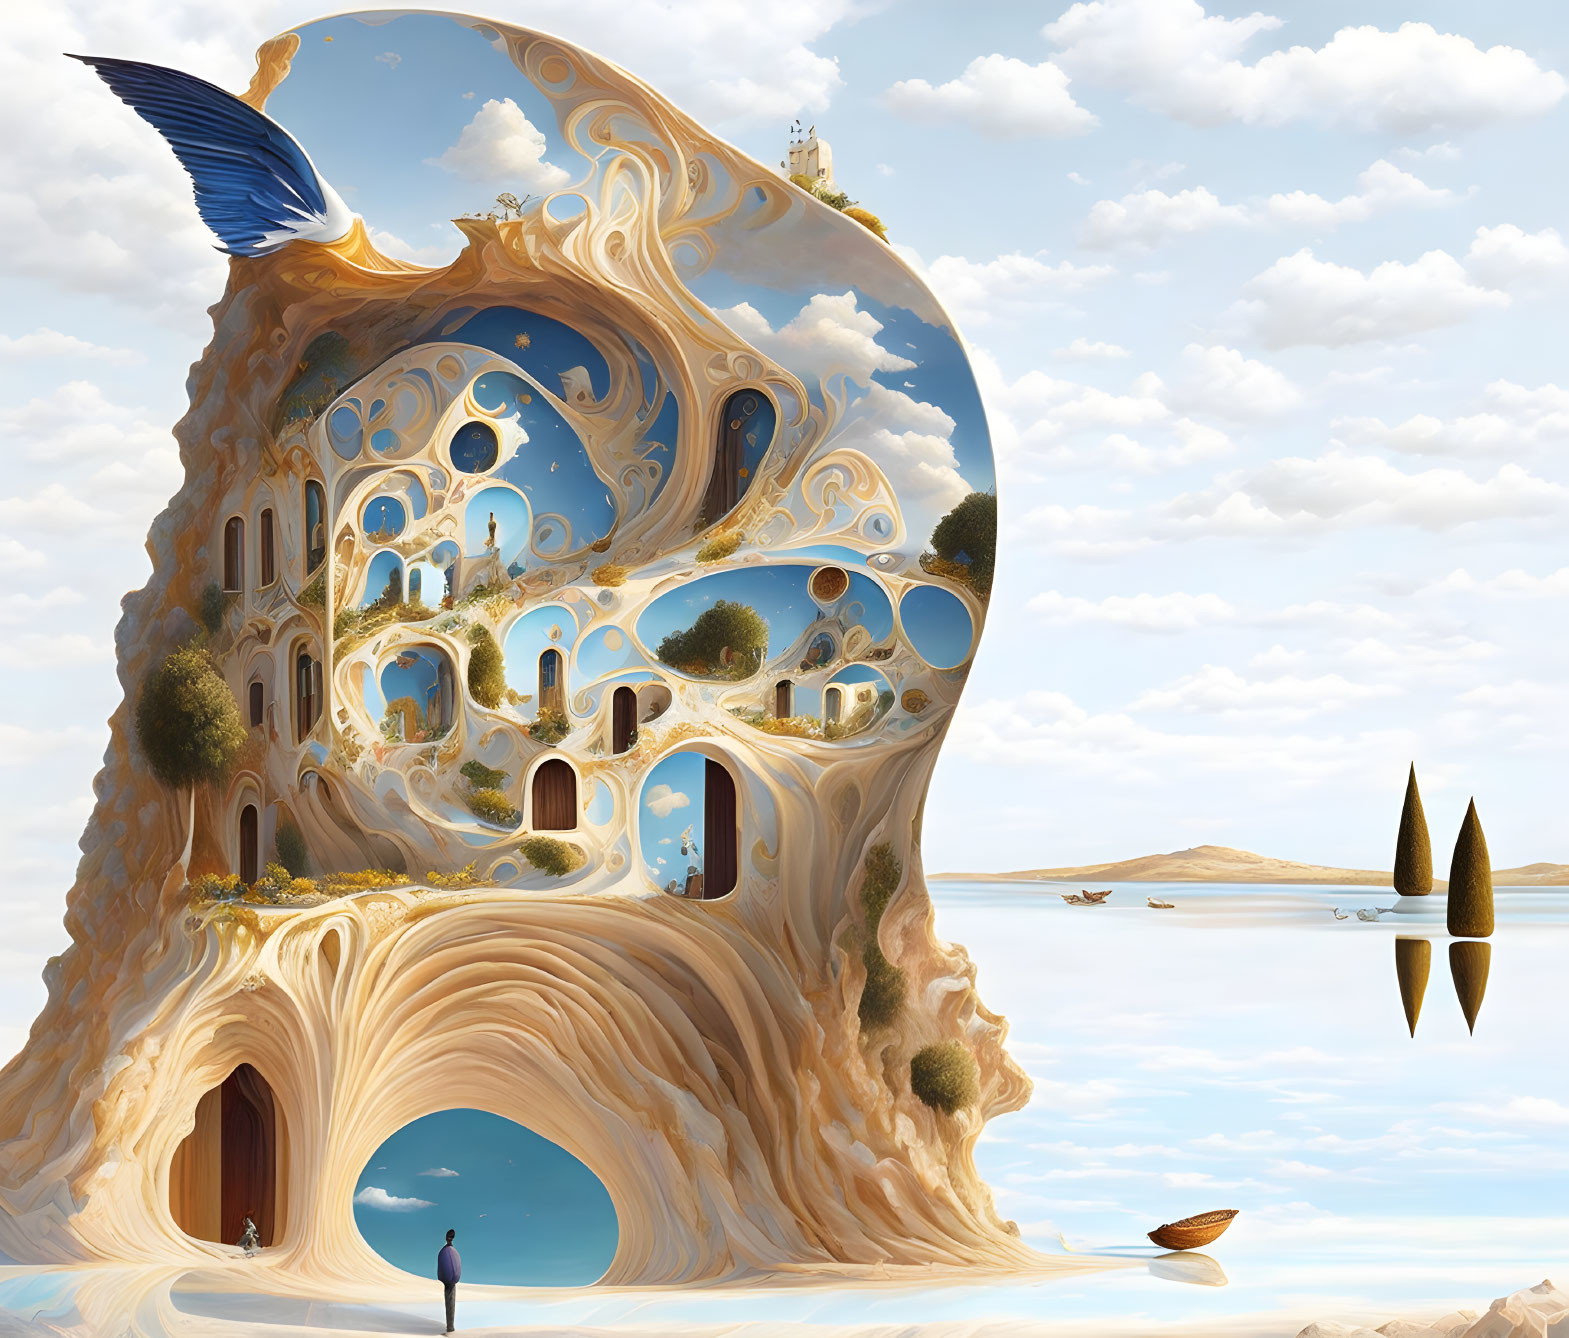 Surreal artwork featuring giant cliff structure, winged boat, lone figure